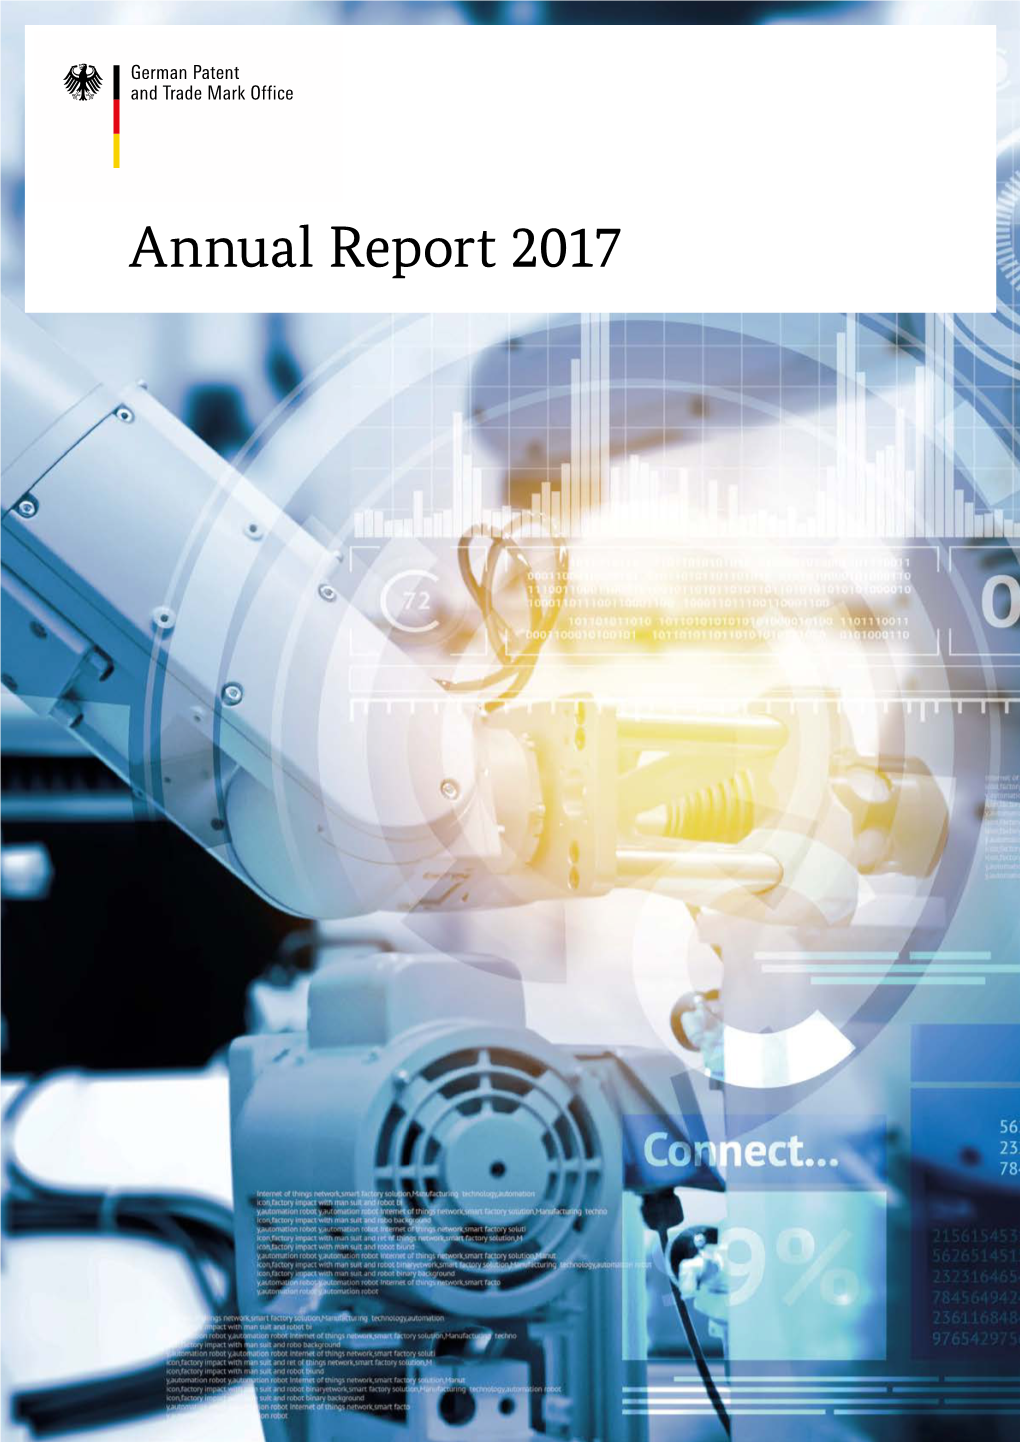 Annual Report 2017 German Patent and Trade Mark Office Annual Report 2017Annual Visit Us in Munich, Jena and Berlin